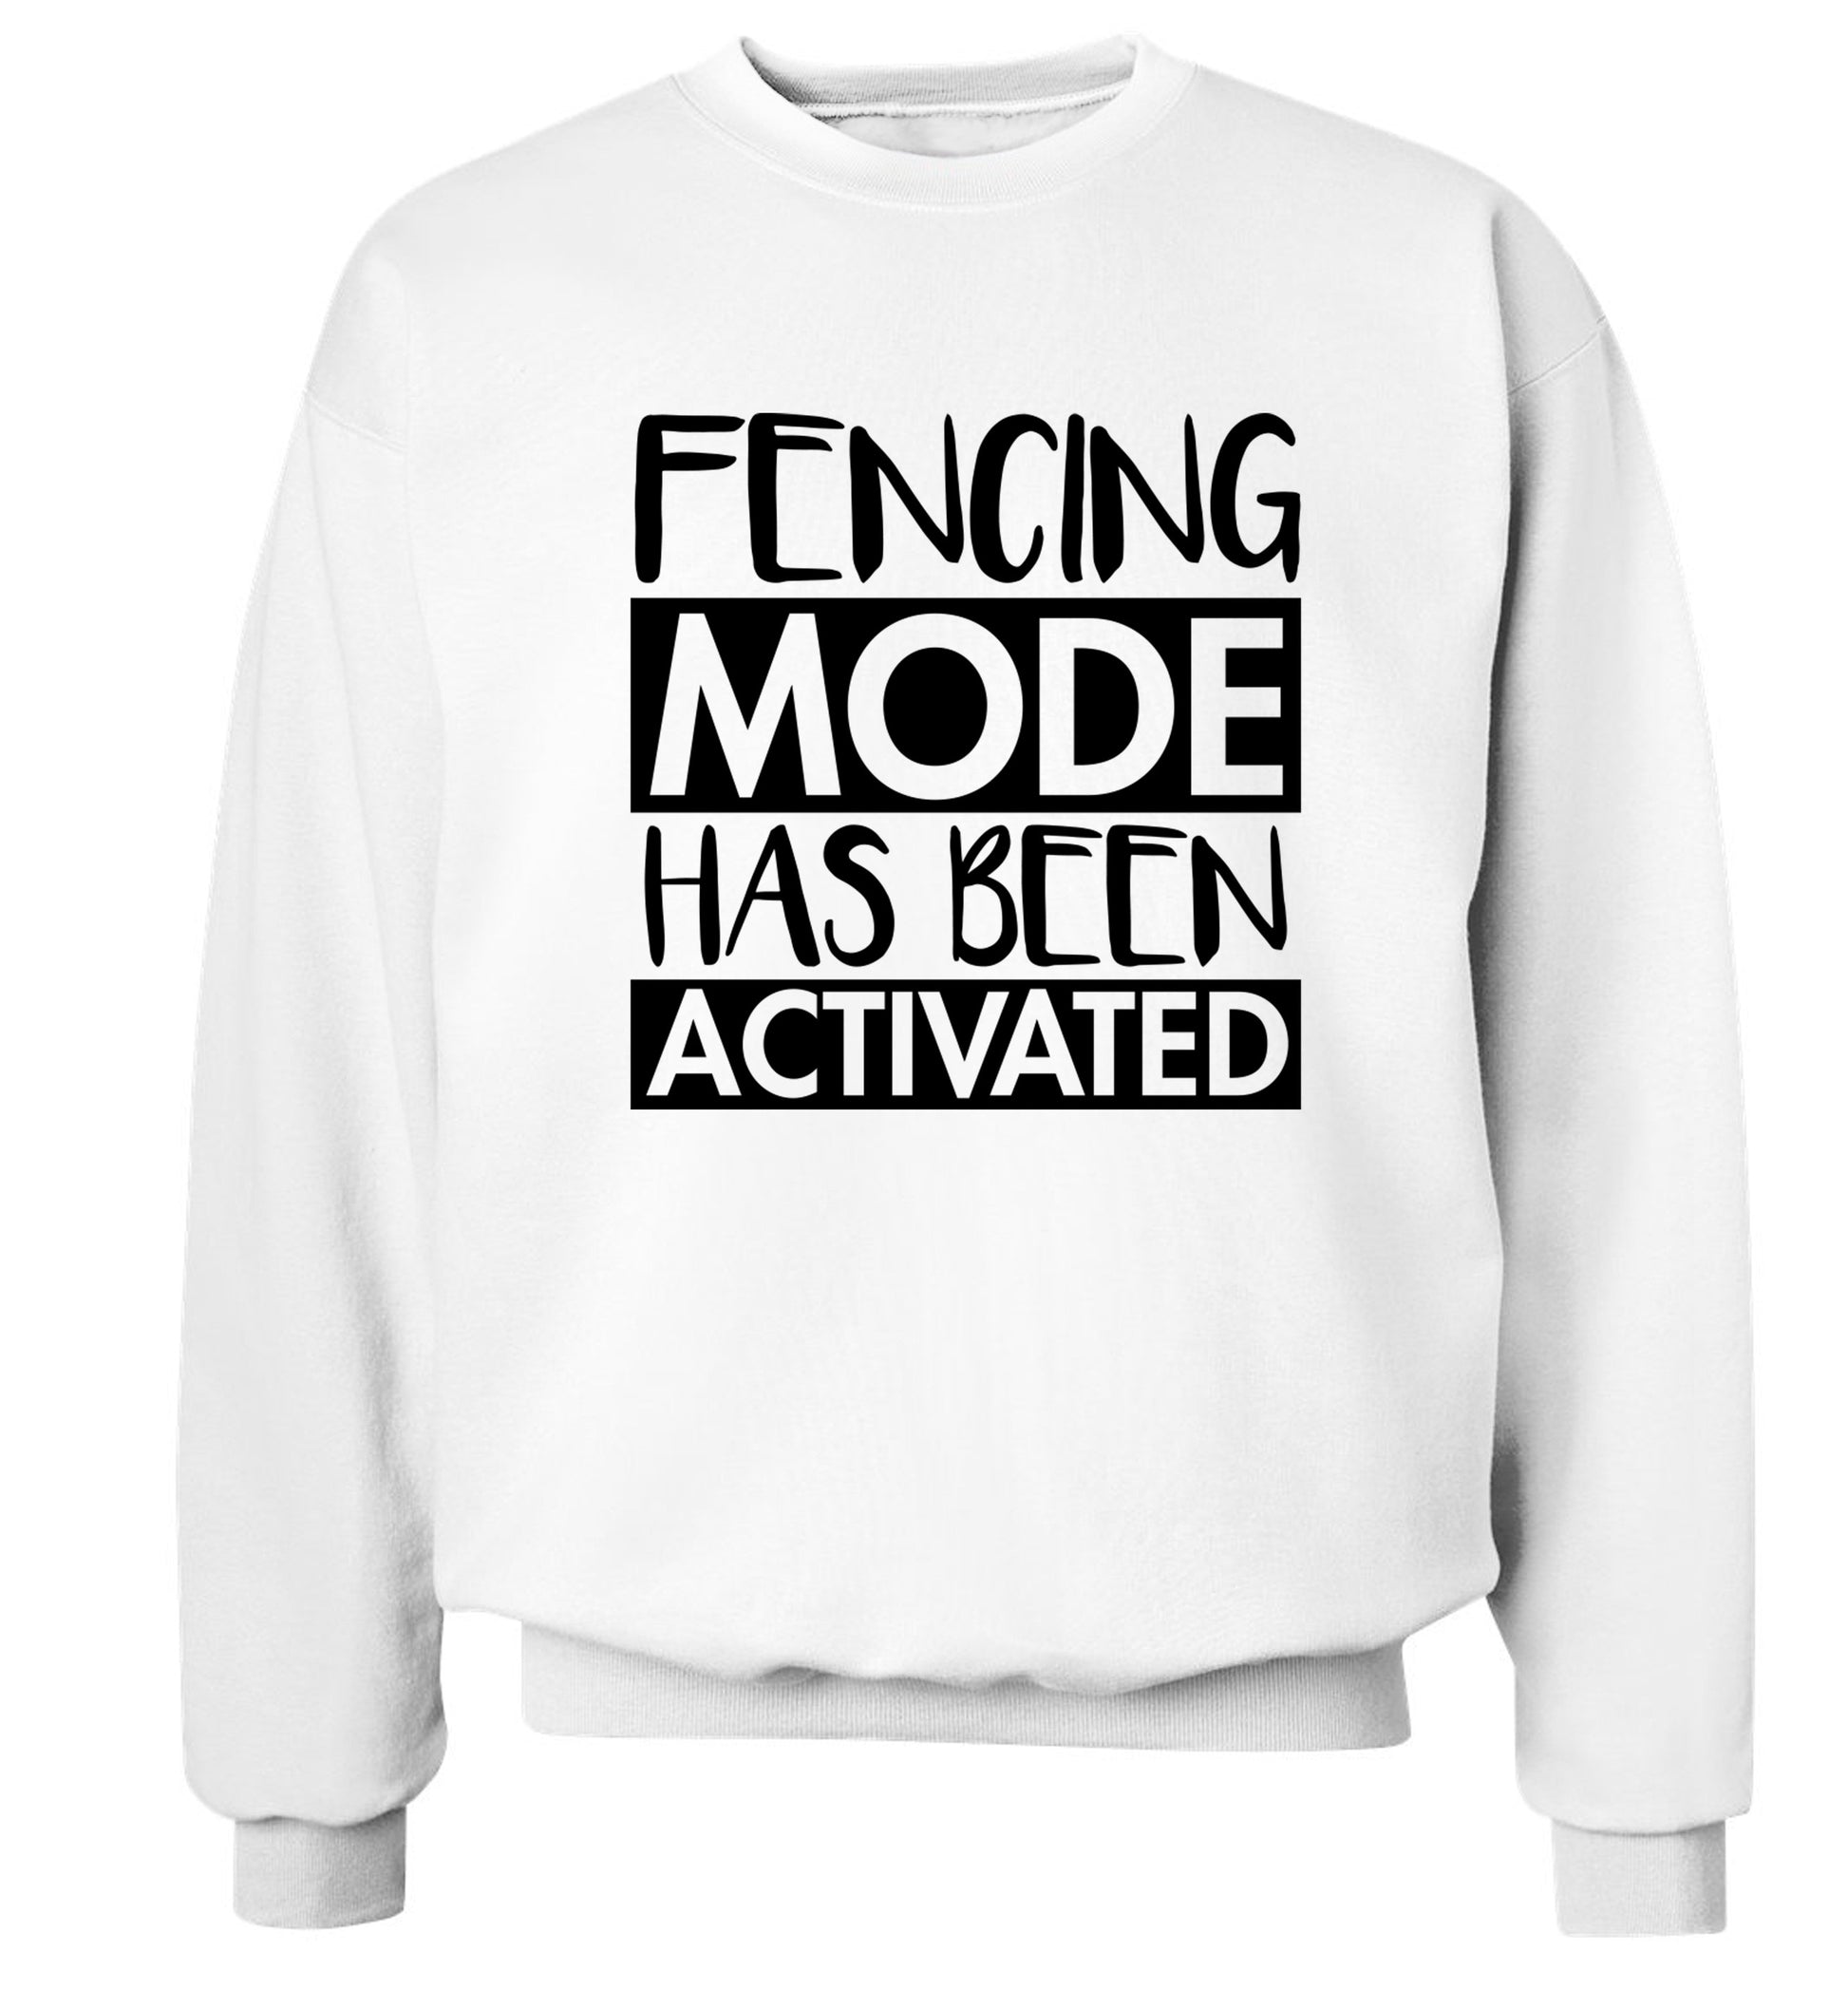 Fencing mode activated Adult's unisex white Sweater 2XL